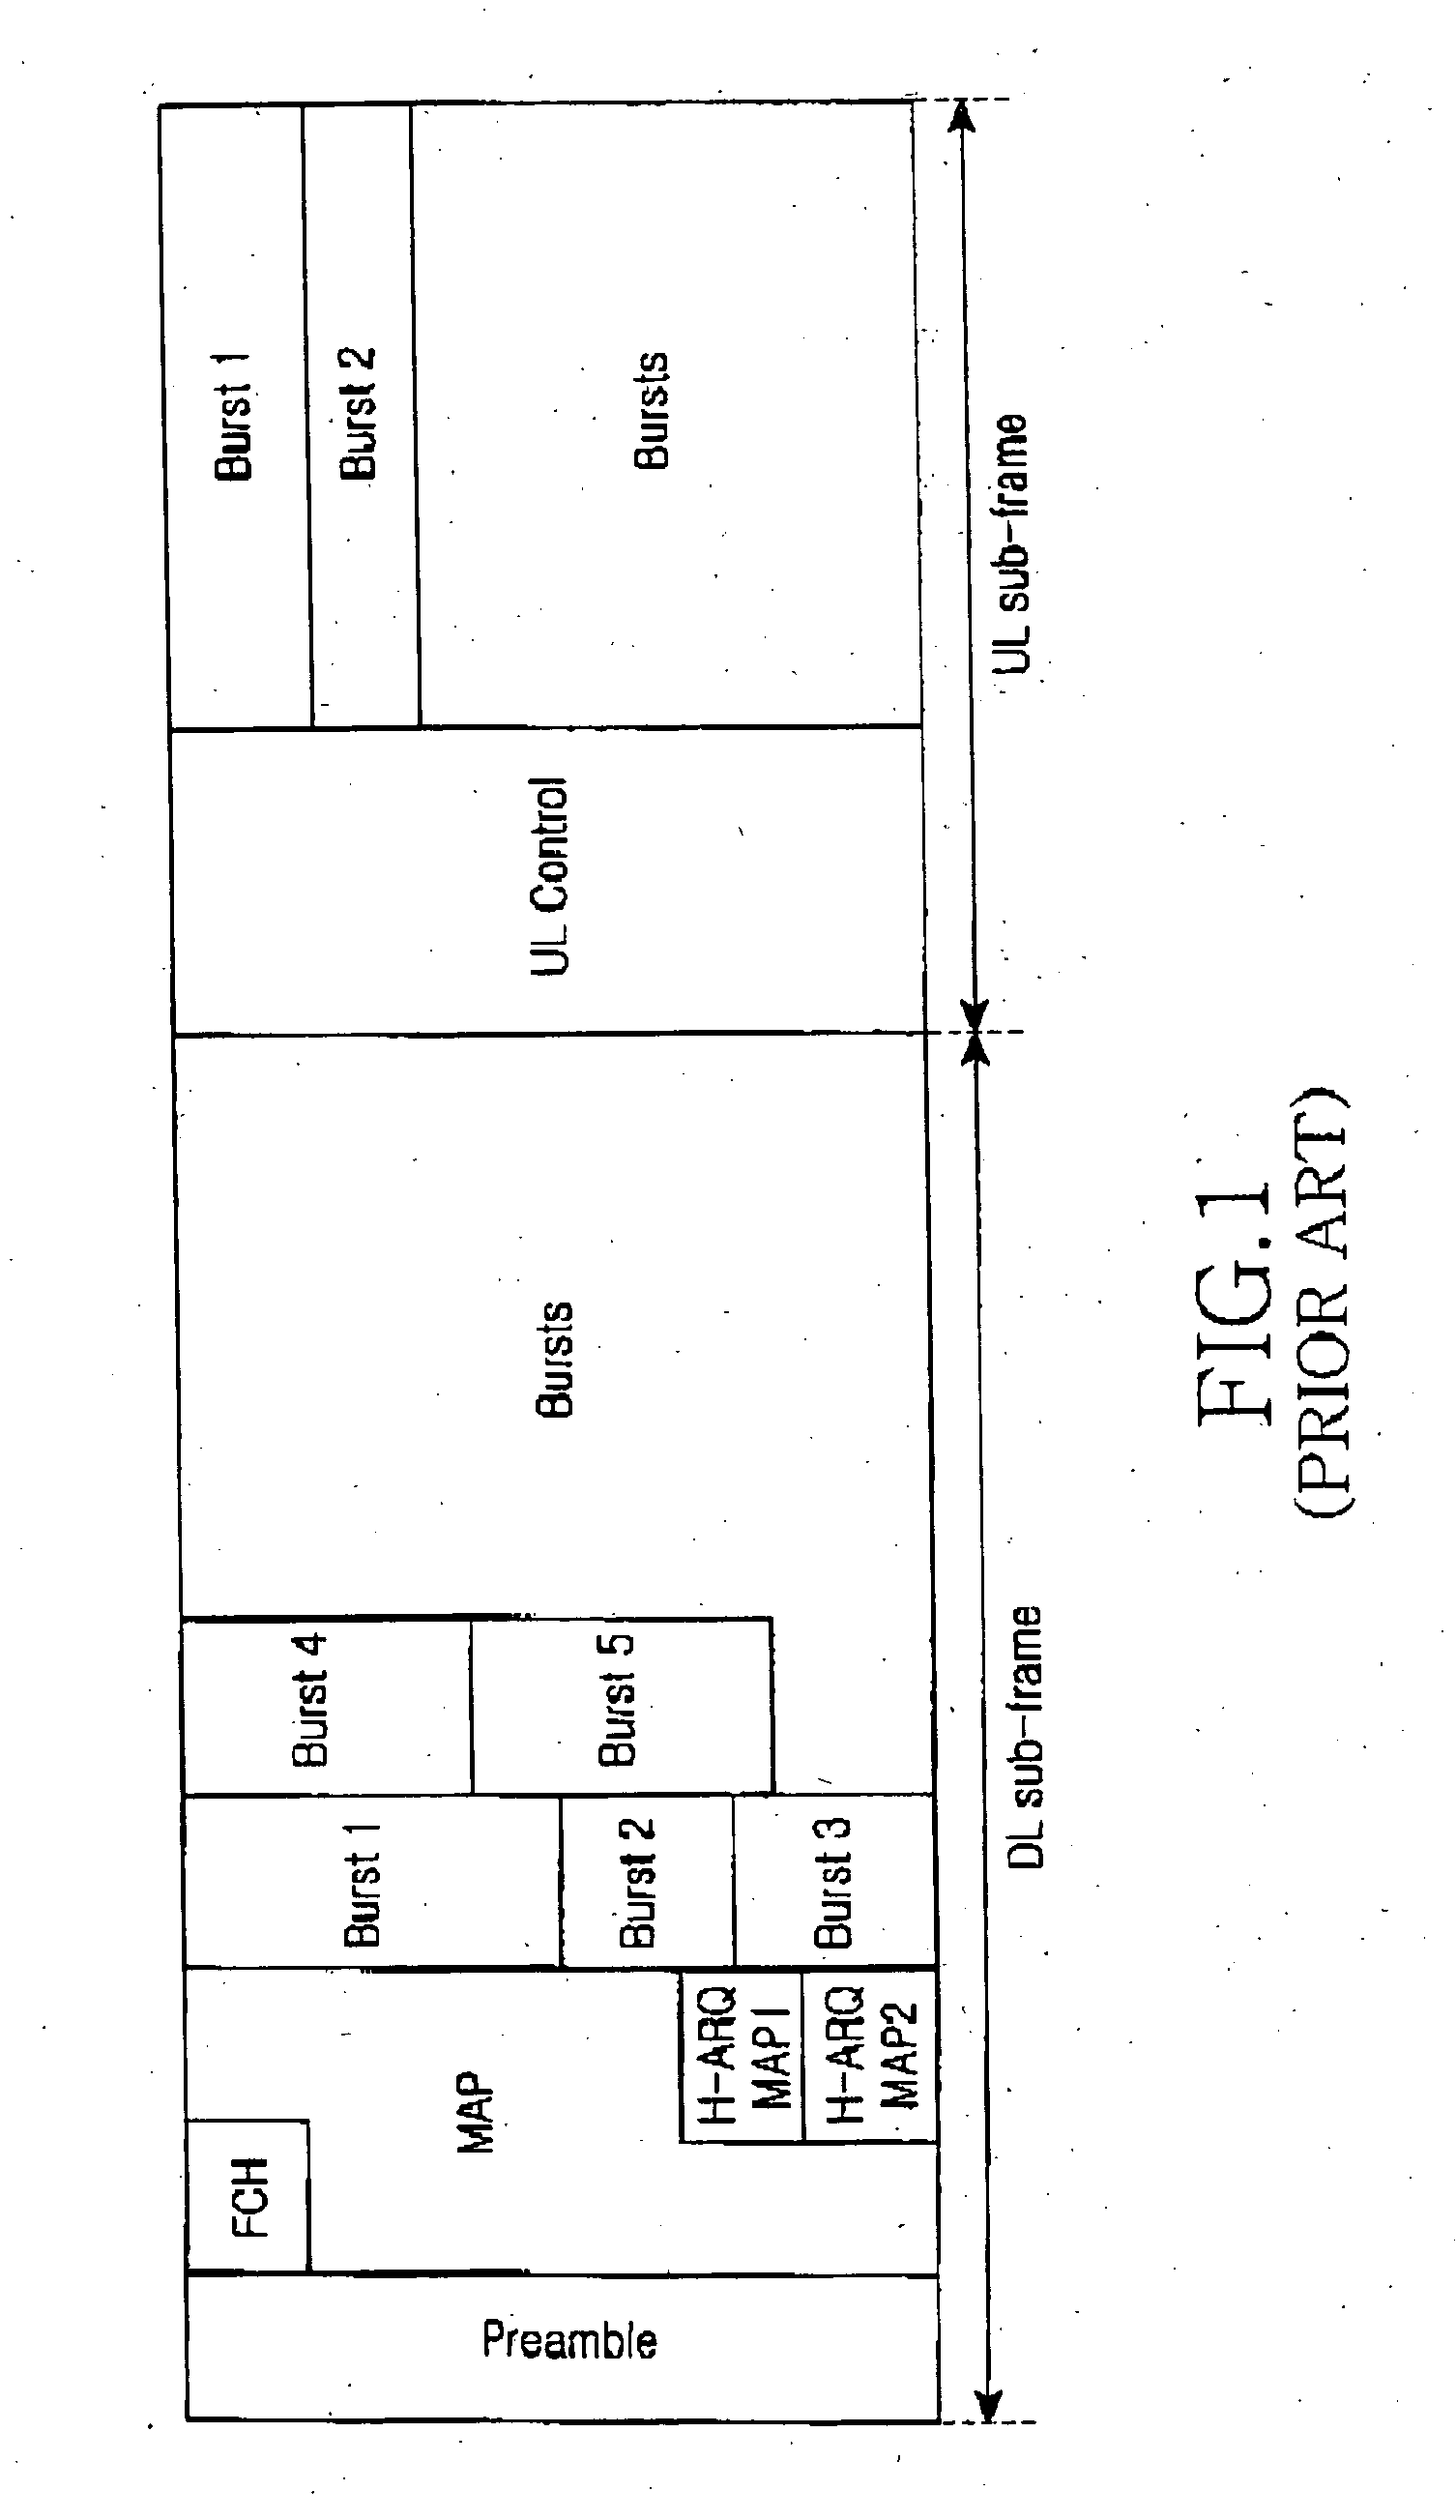 Method and system for indicating data burst allocation in a wireless communication system